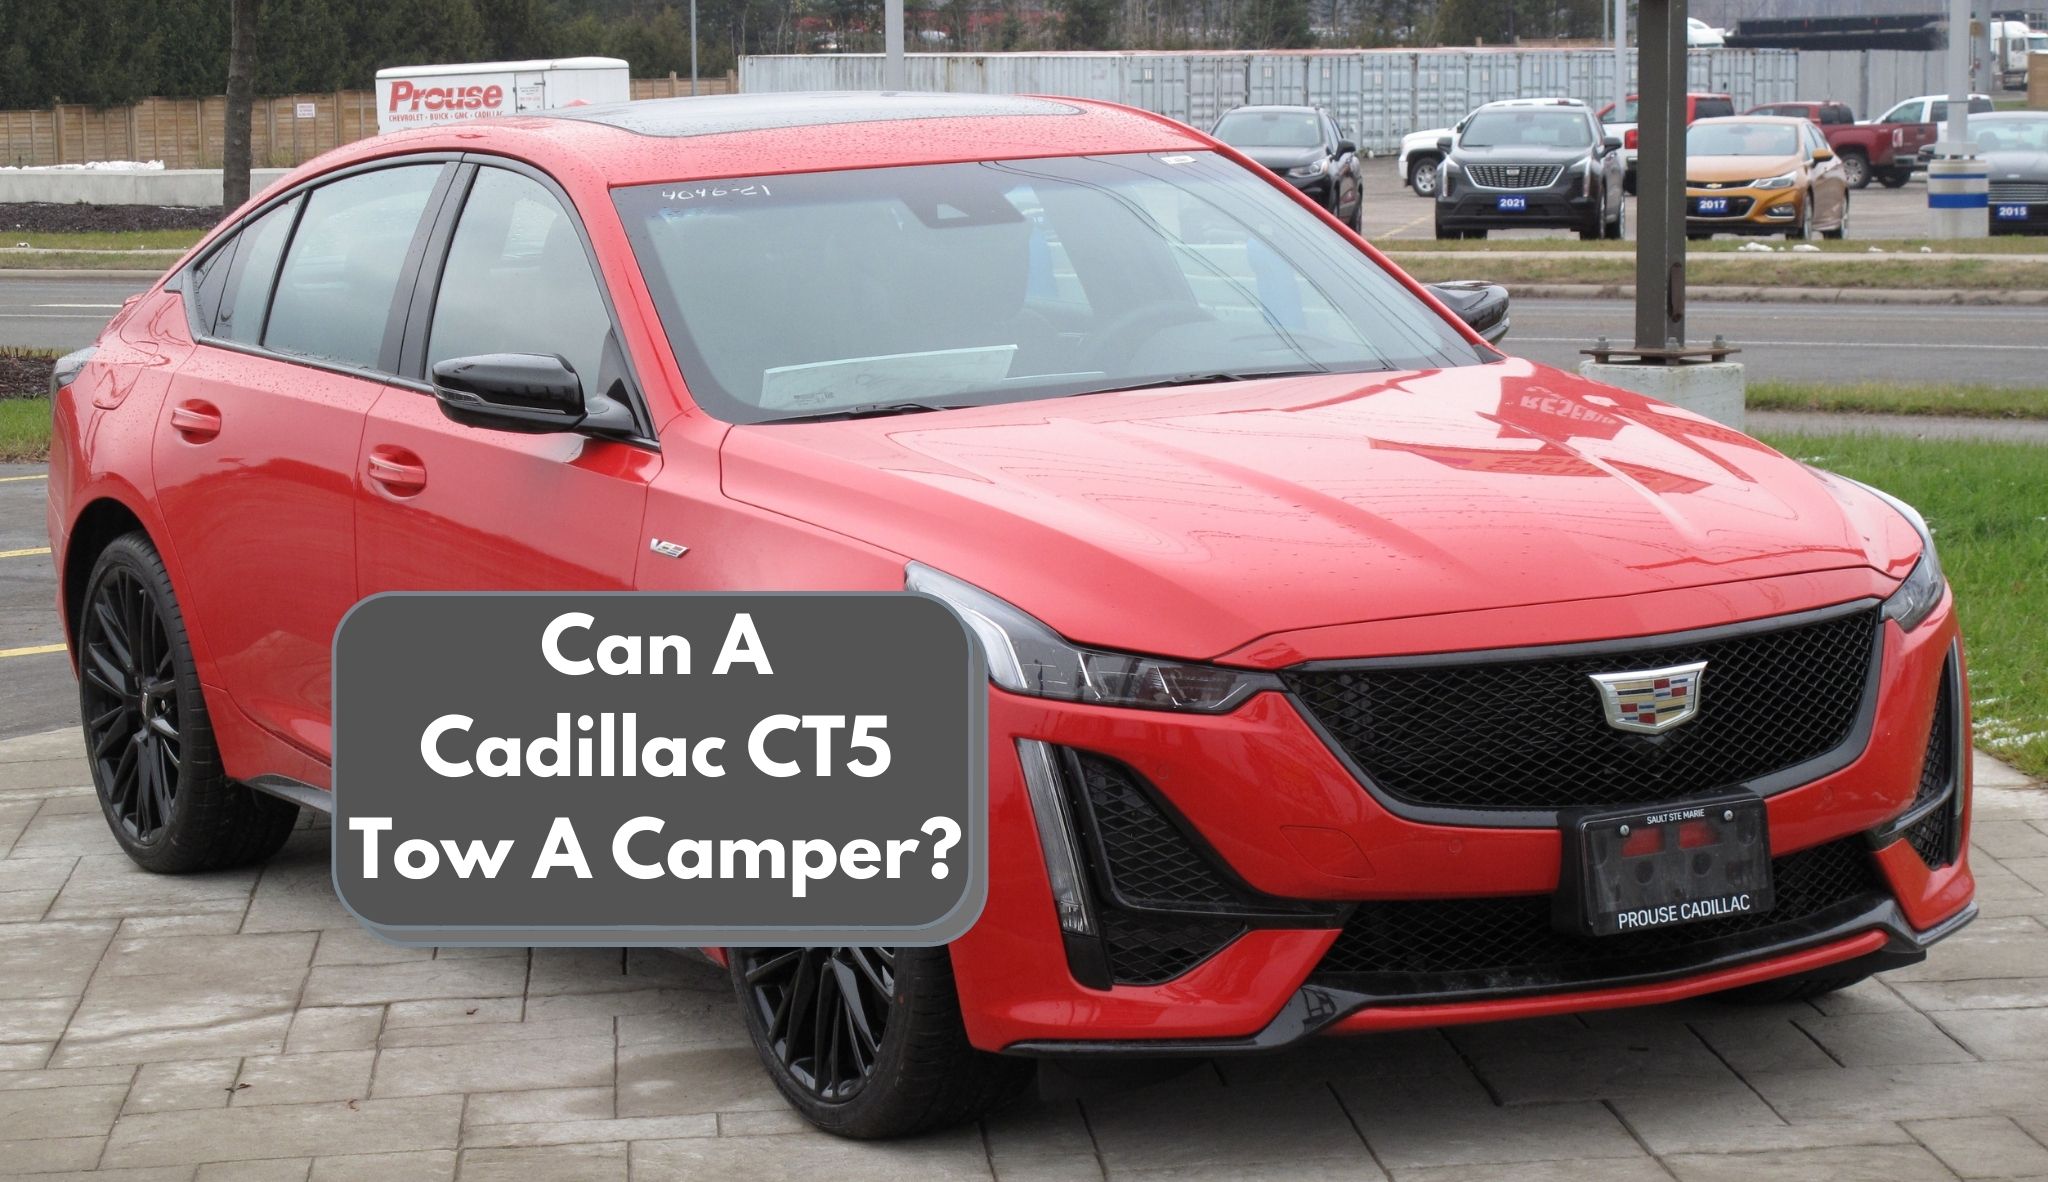 Can A Cadillac CT5 Tow A Camper